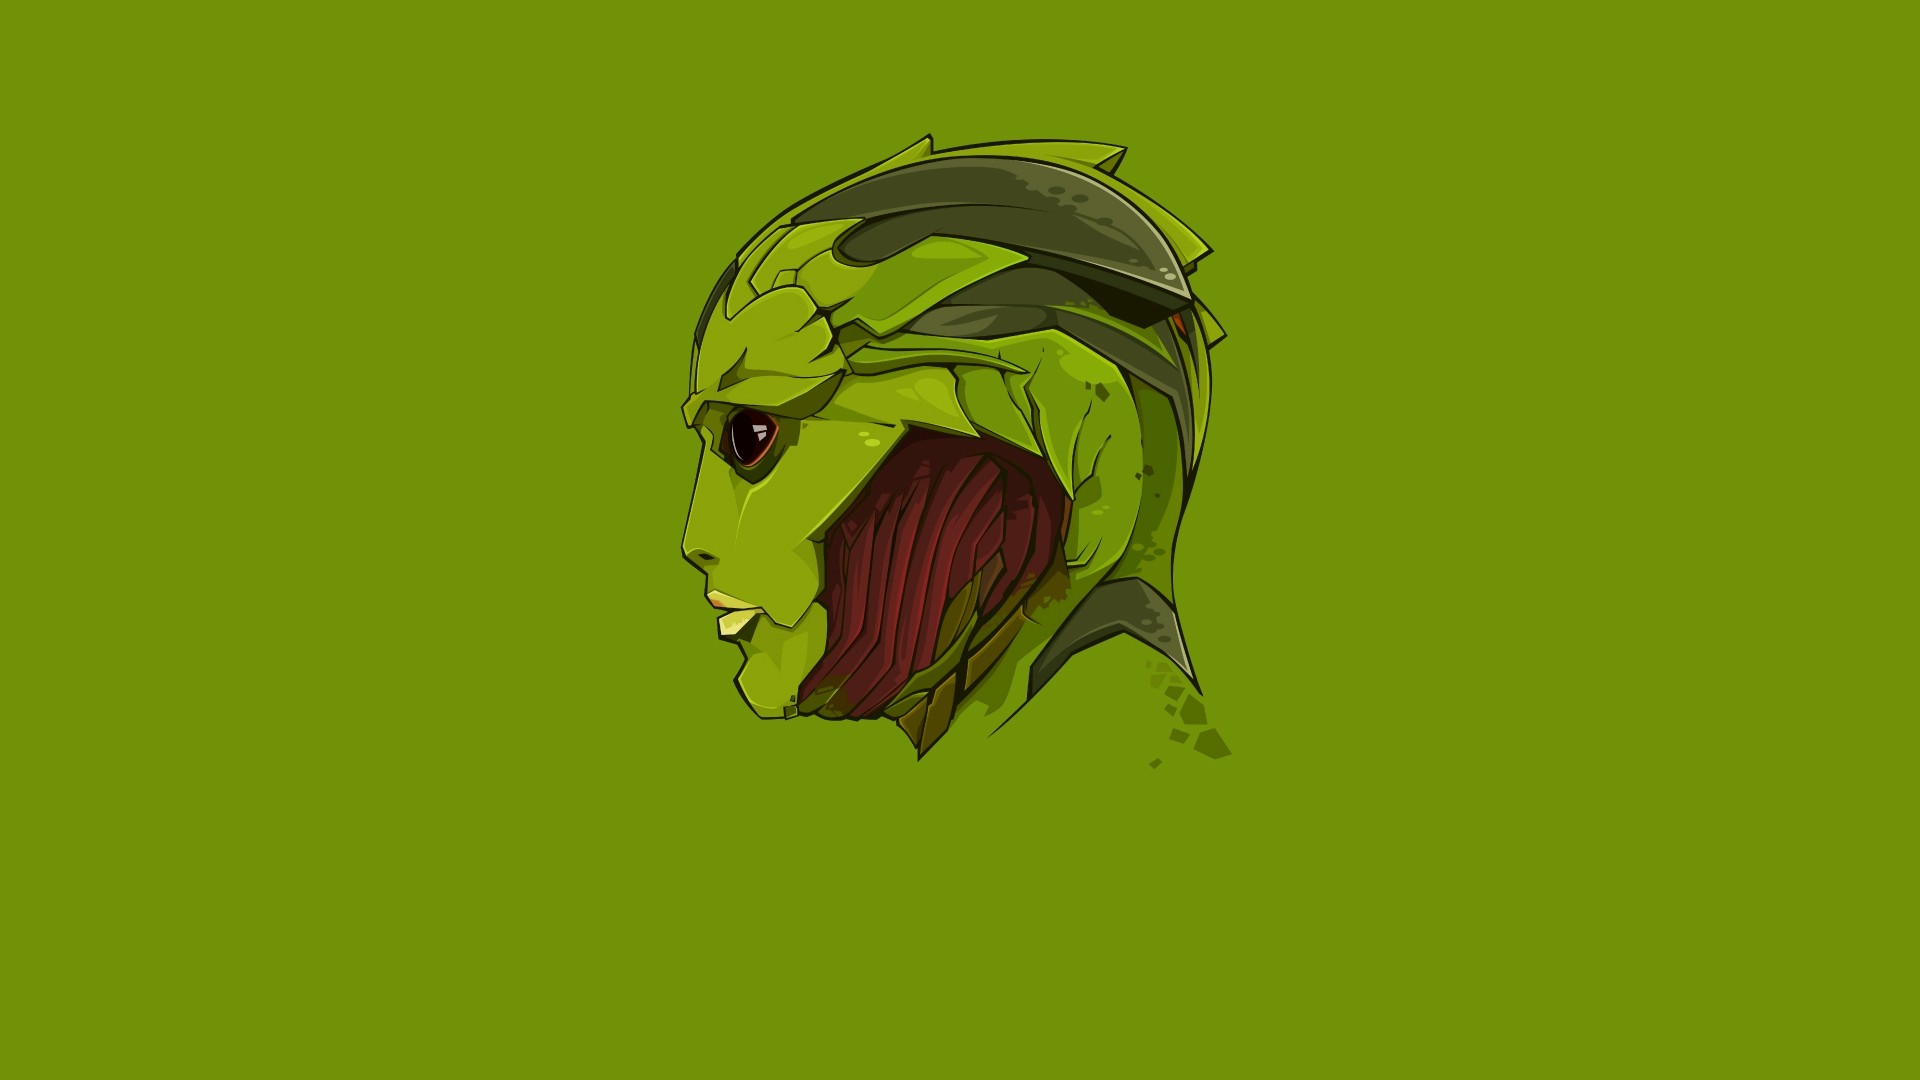 Download mobile wallpaper Thane Krios, Mass Effect, Video Game for free.